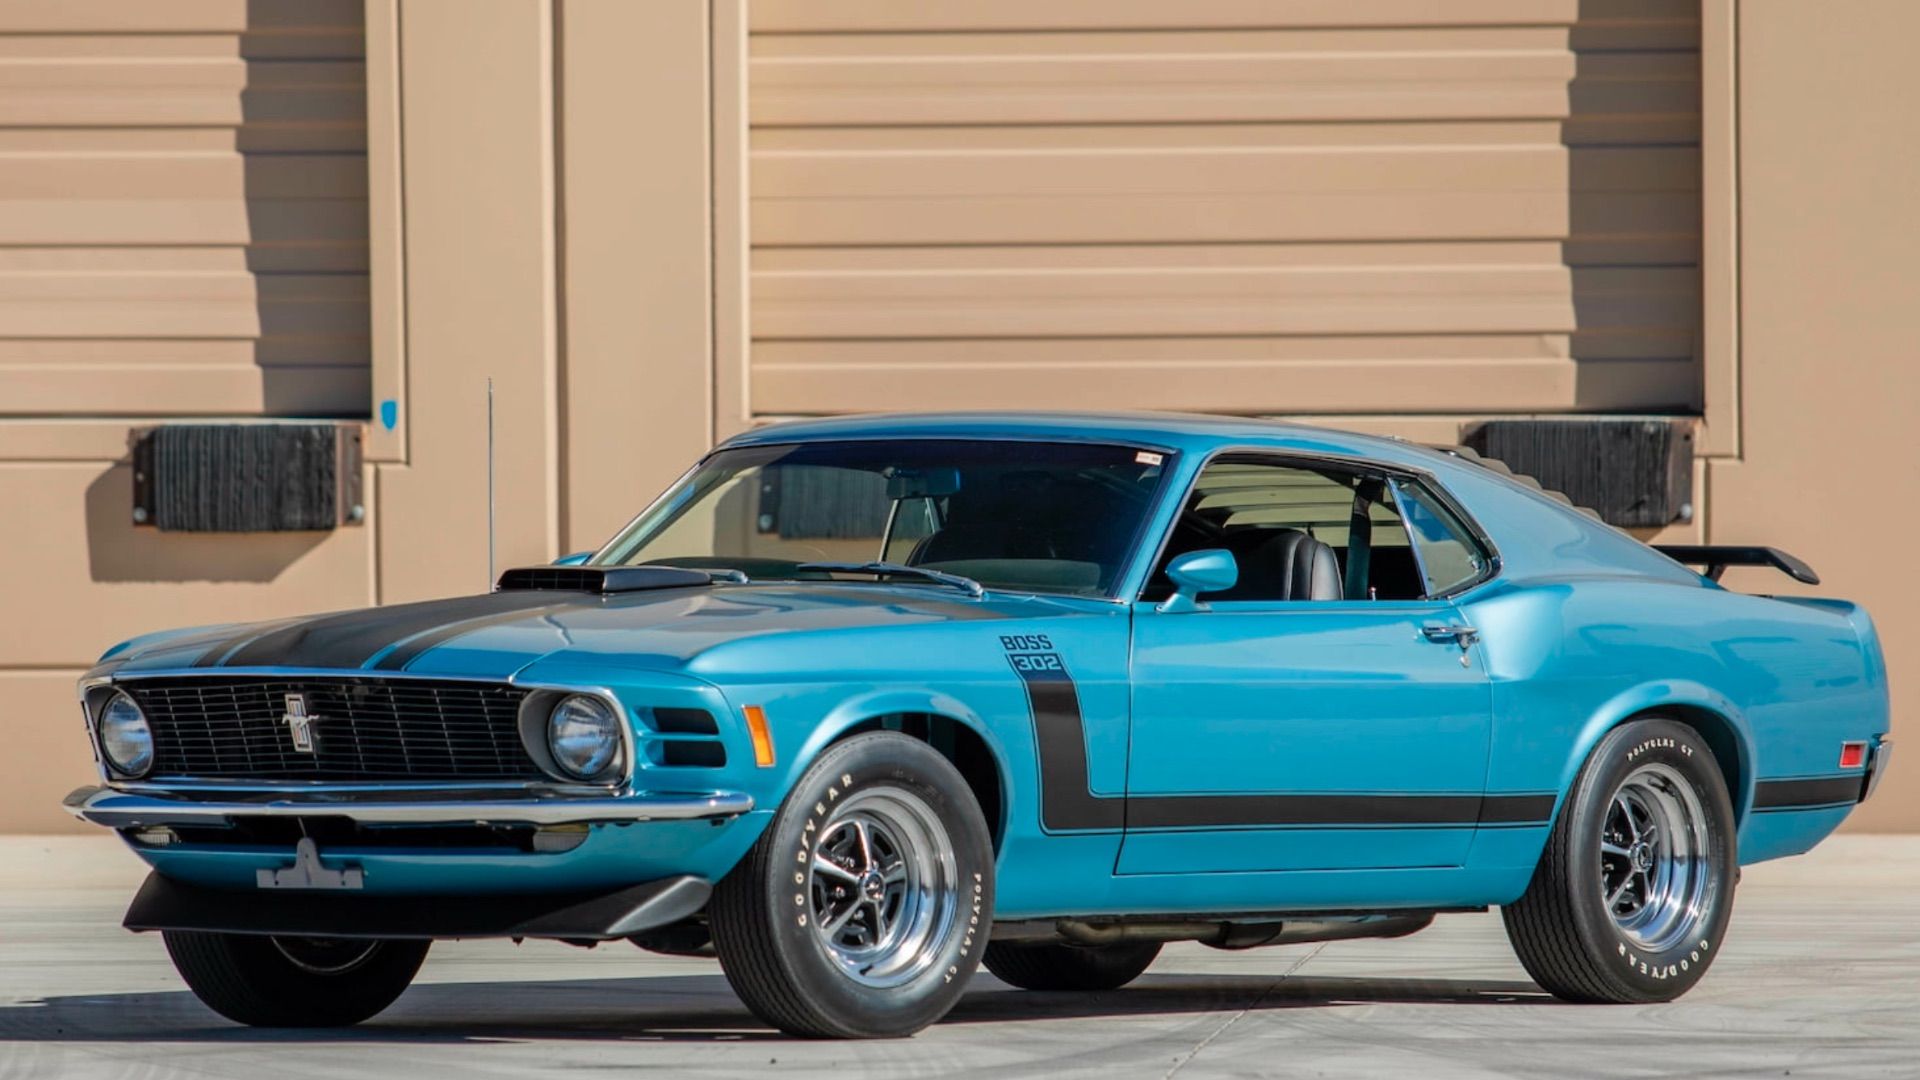 1970 Ford Mustang Boss 302 Is A True Pony Car